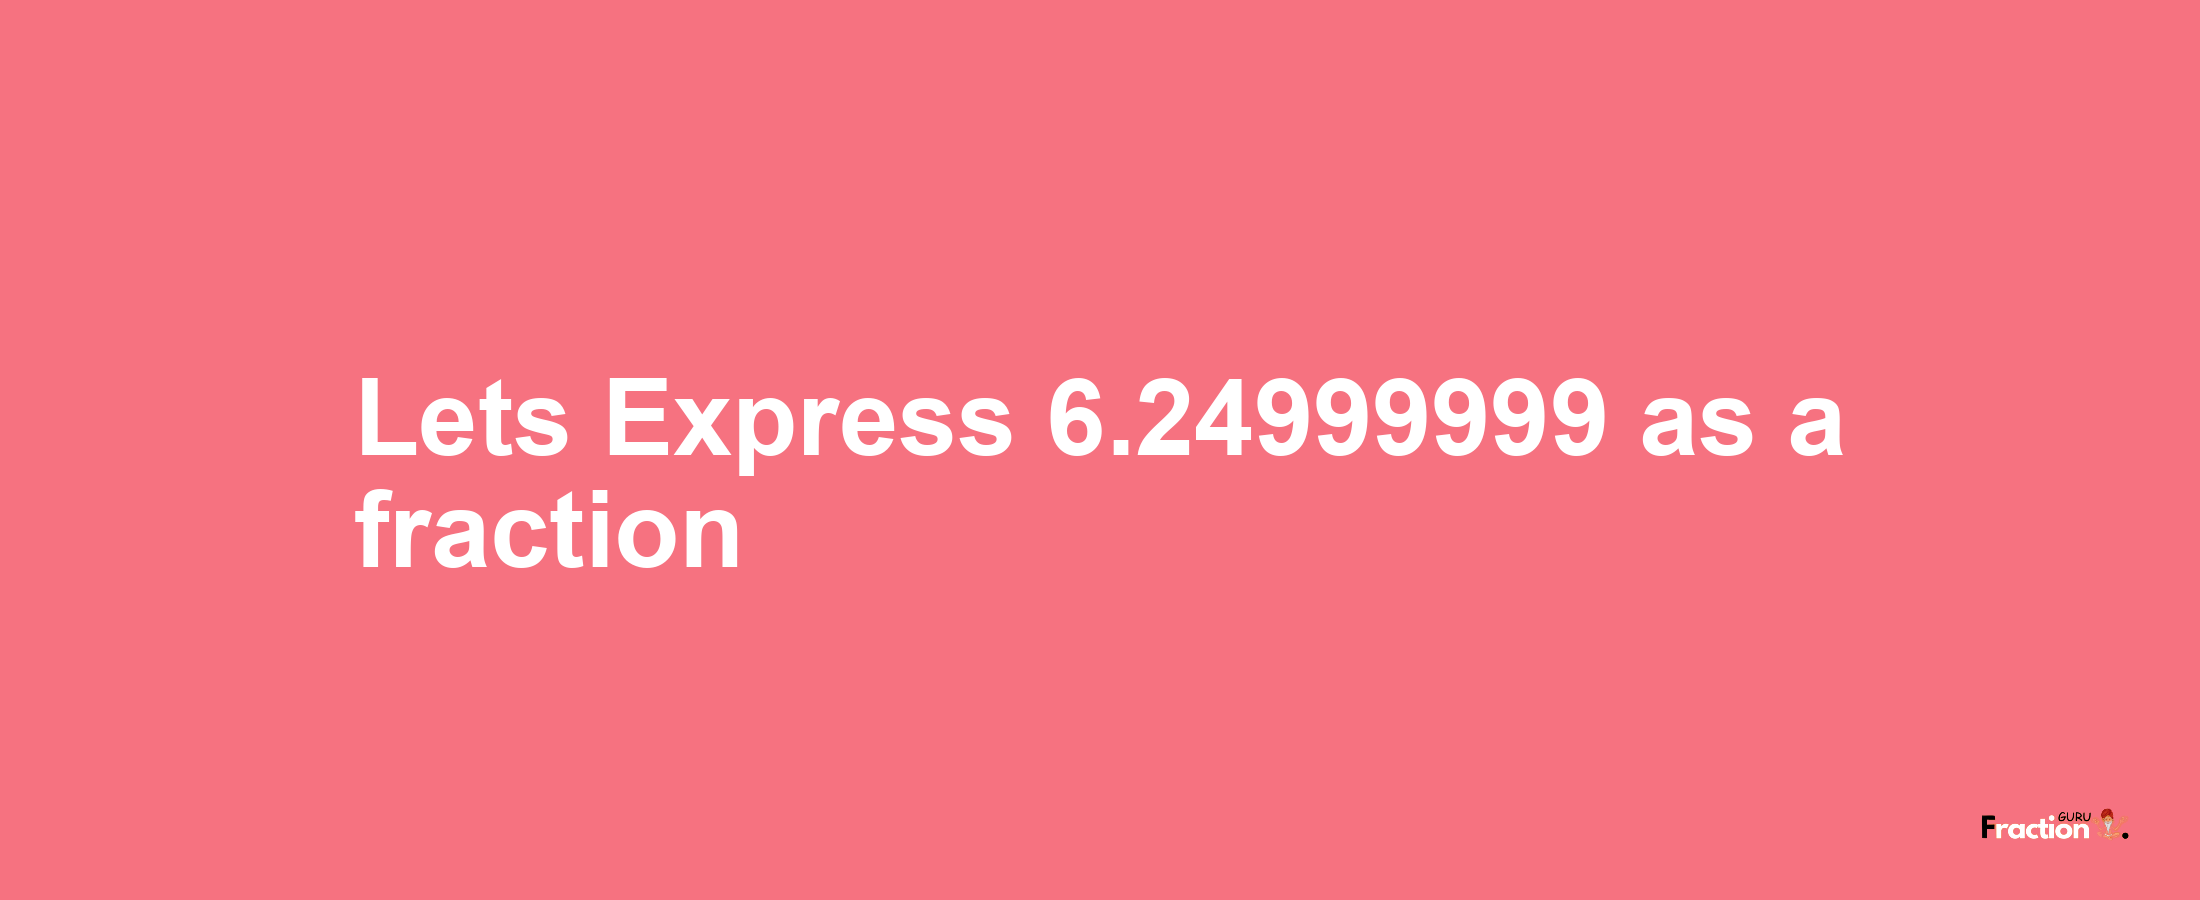 Lets Express 6.24999999 as afraction